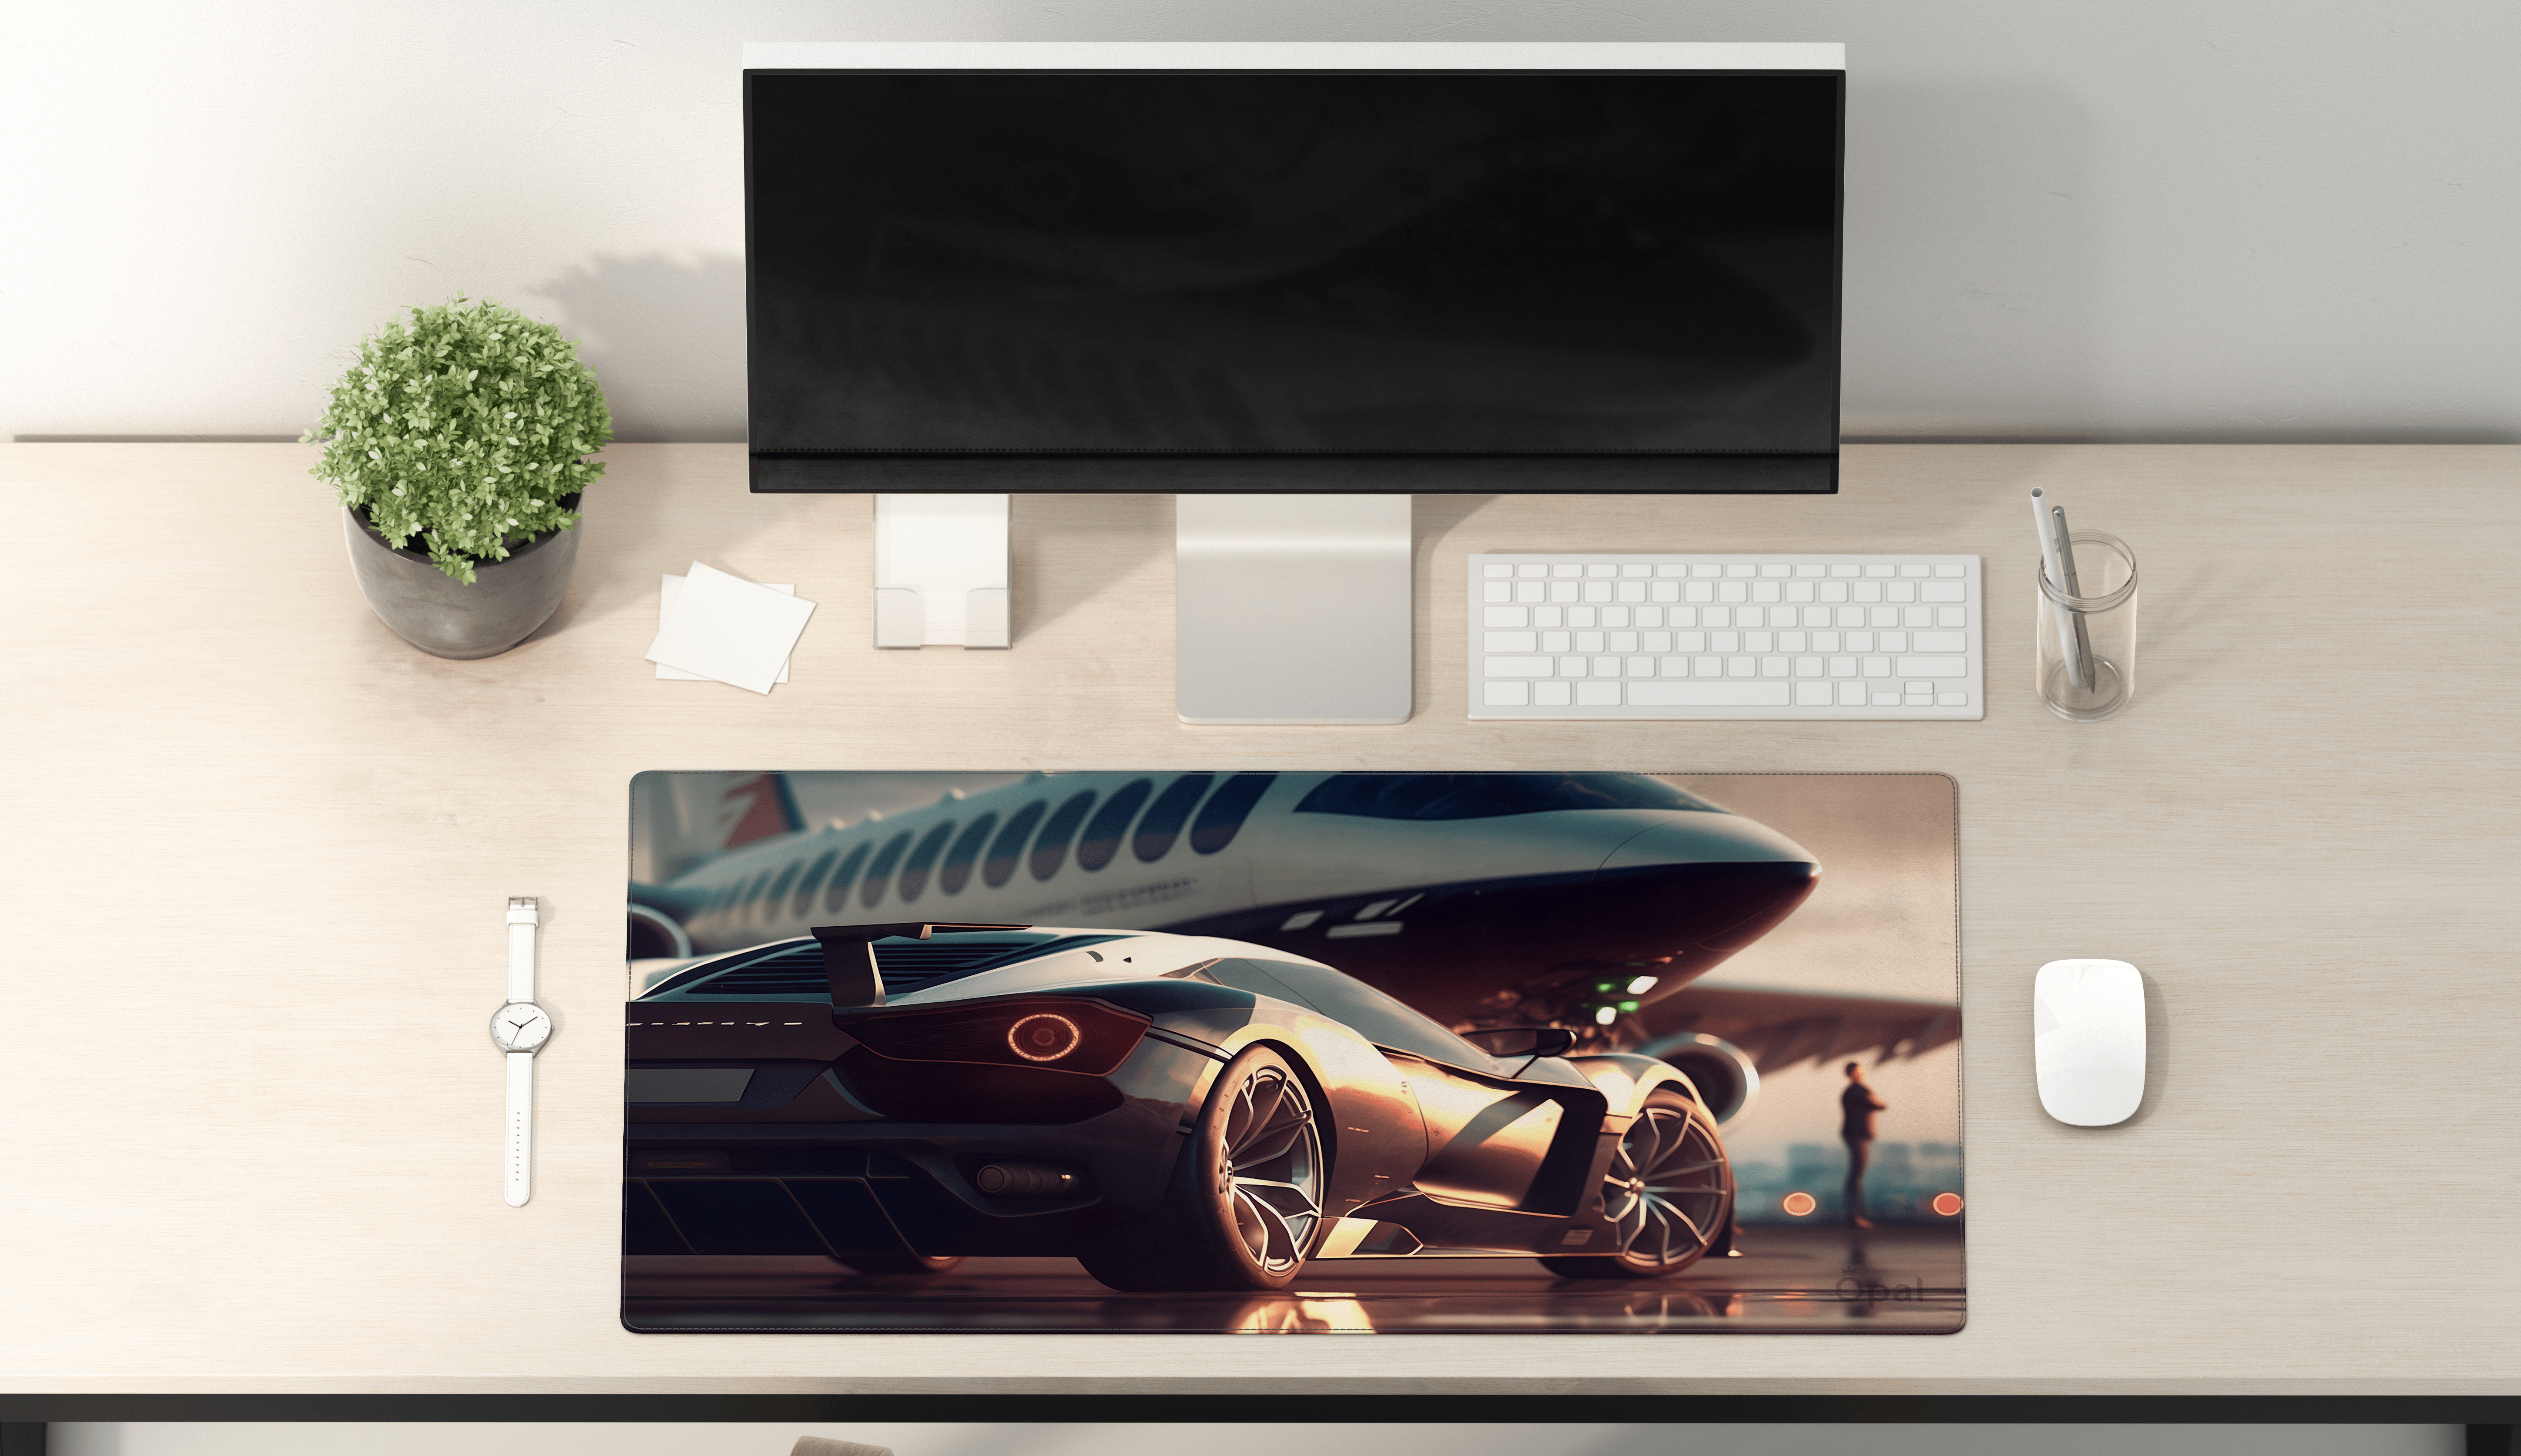 PRIVATE JET AND LUXURY CAR AT THE AIRPORT DESK PAD